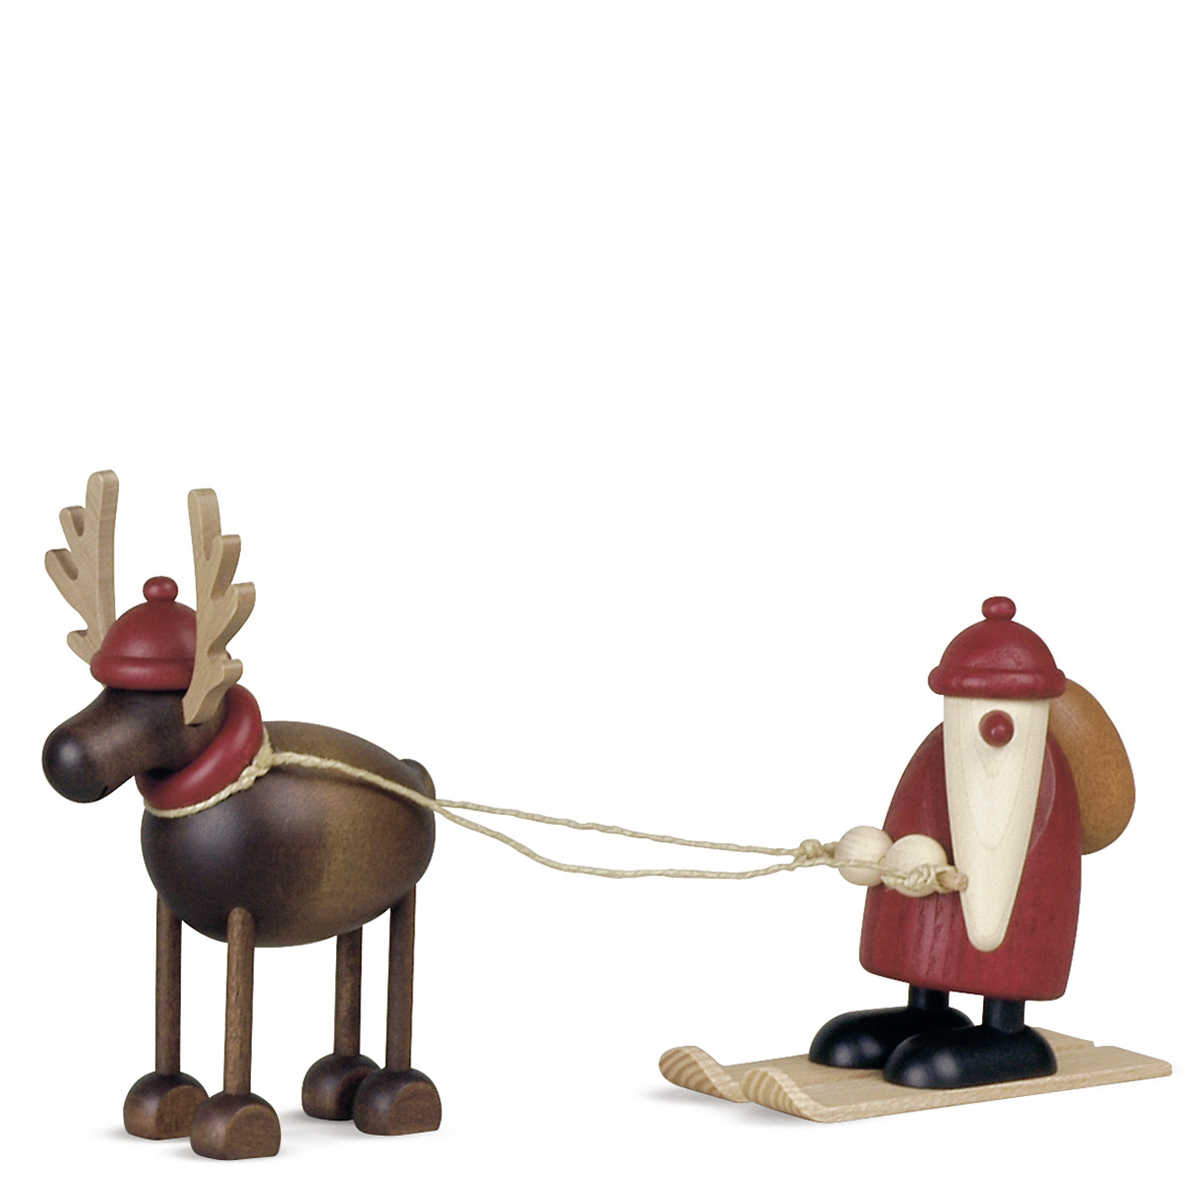 Rudolf the Reindeer with Santa Claus on skis, small